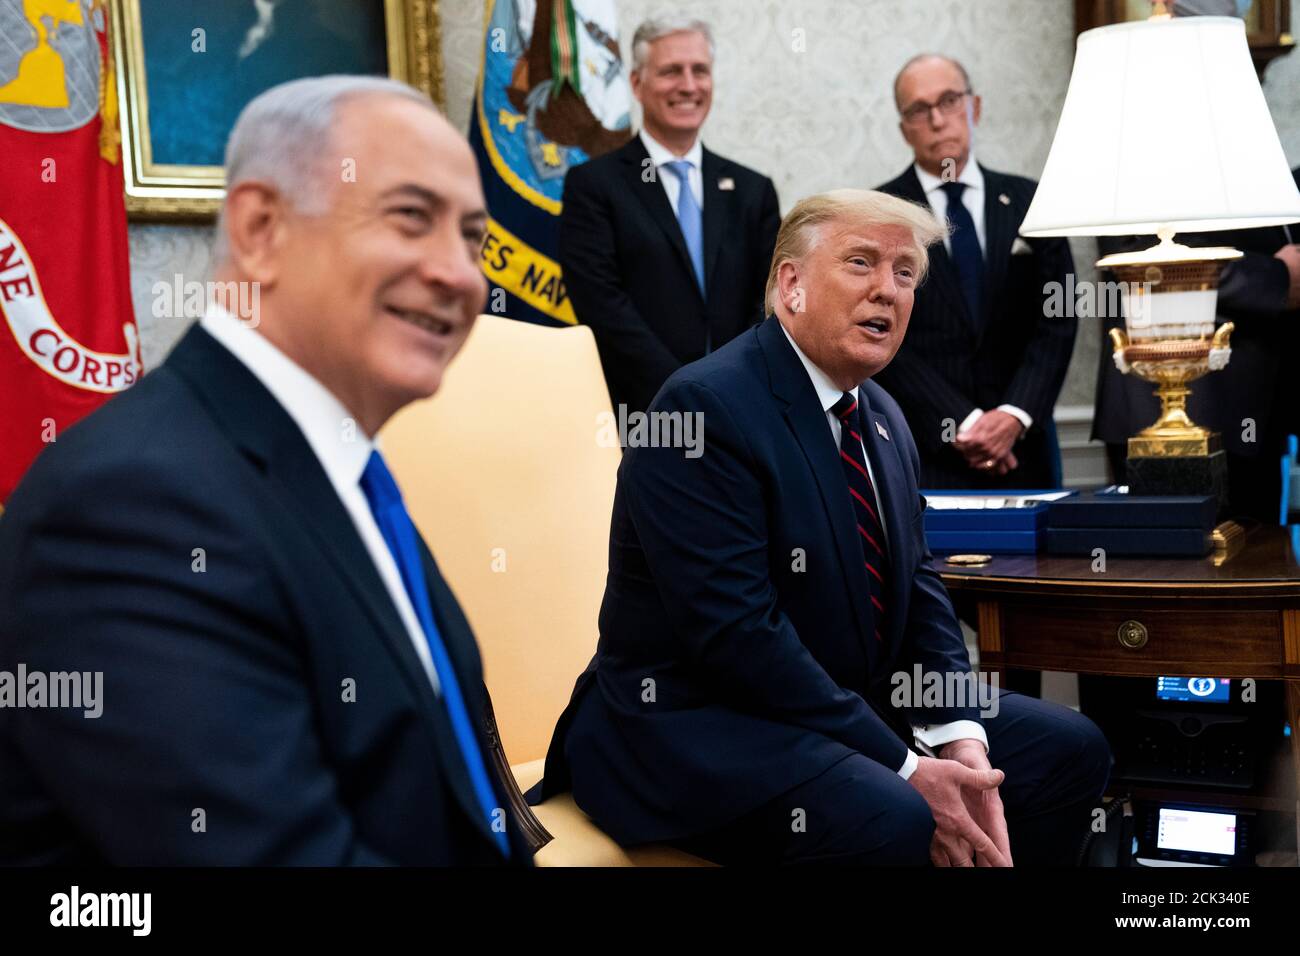 United States President Donald J. Trump meets with Prime Minister Benjamin Netanyhu of Israel ahead of the Abraham Accords Signing Ceremony on the South Lawn of the White House, Tuesday, Sept. 15, 2020. Credit: Doug Mills/Pool via CNP /MediaPunch Stock Photo